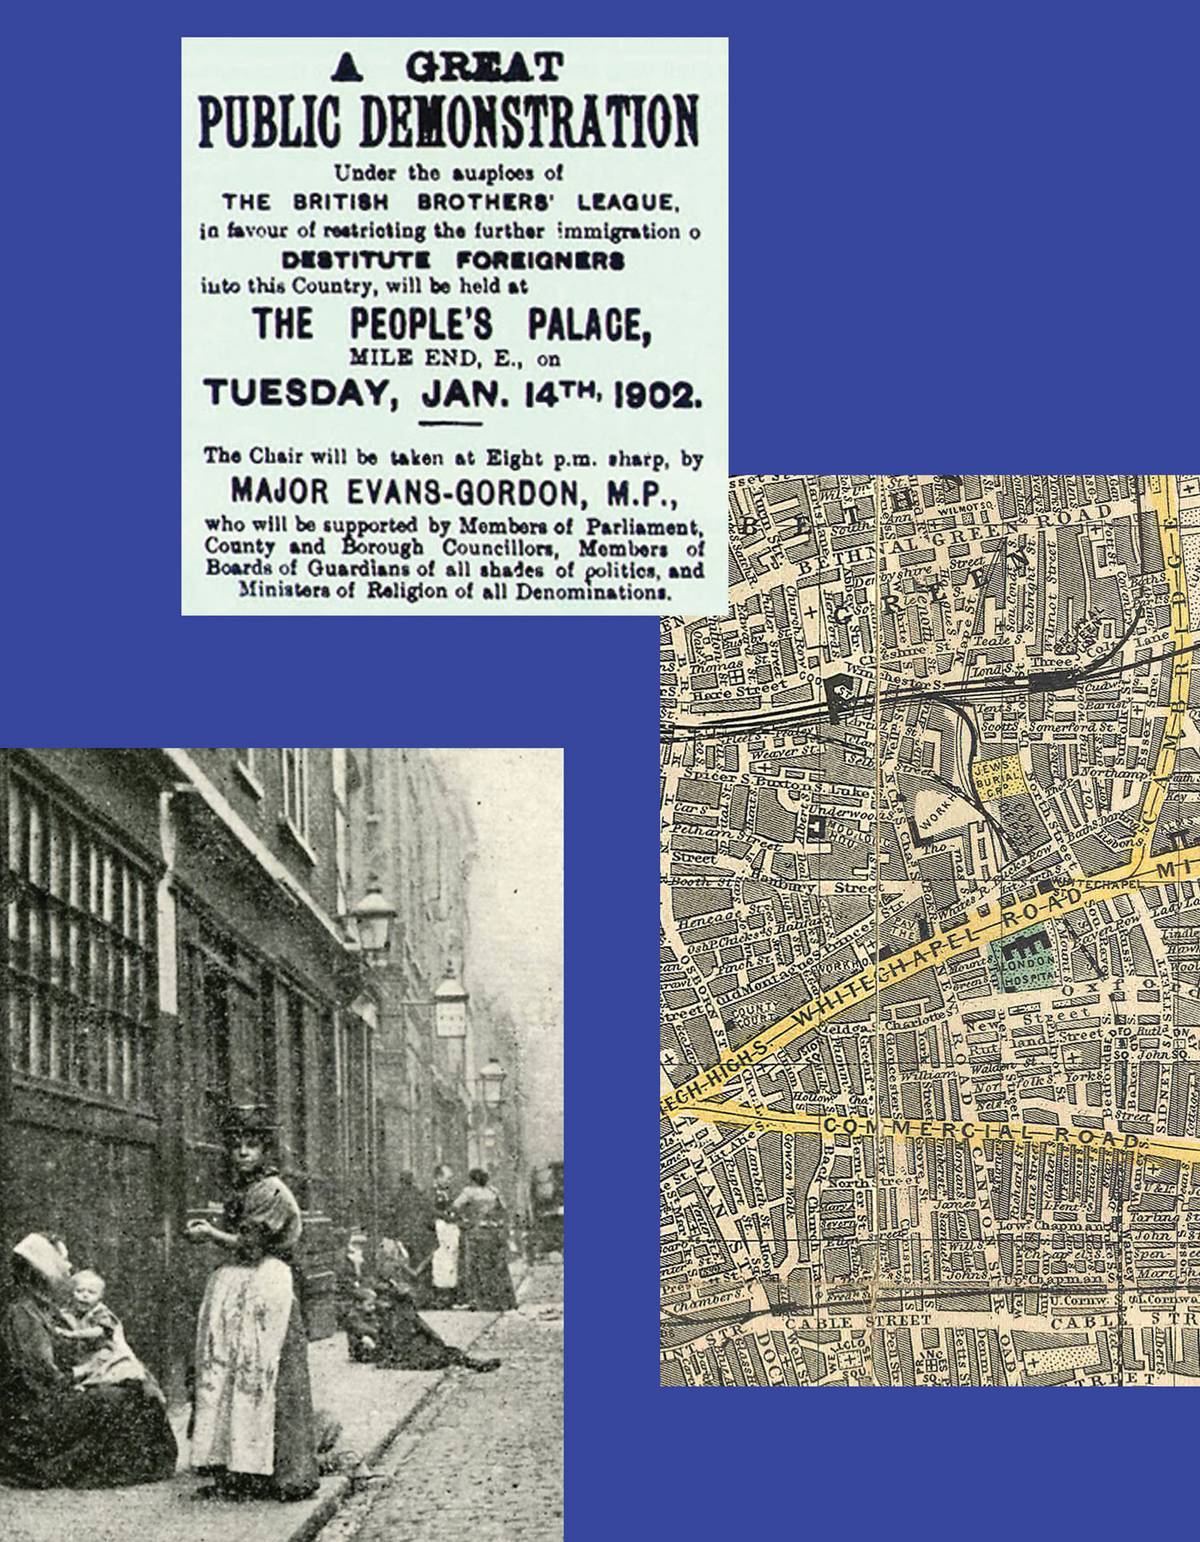 Clockwise from top left: 1902 British Brothers' League anti-immigration poster; 1882 map of the East End; Dorset Street, 1902